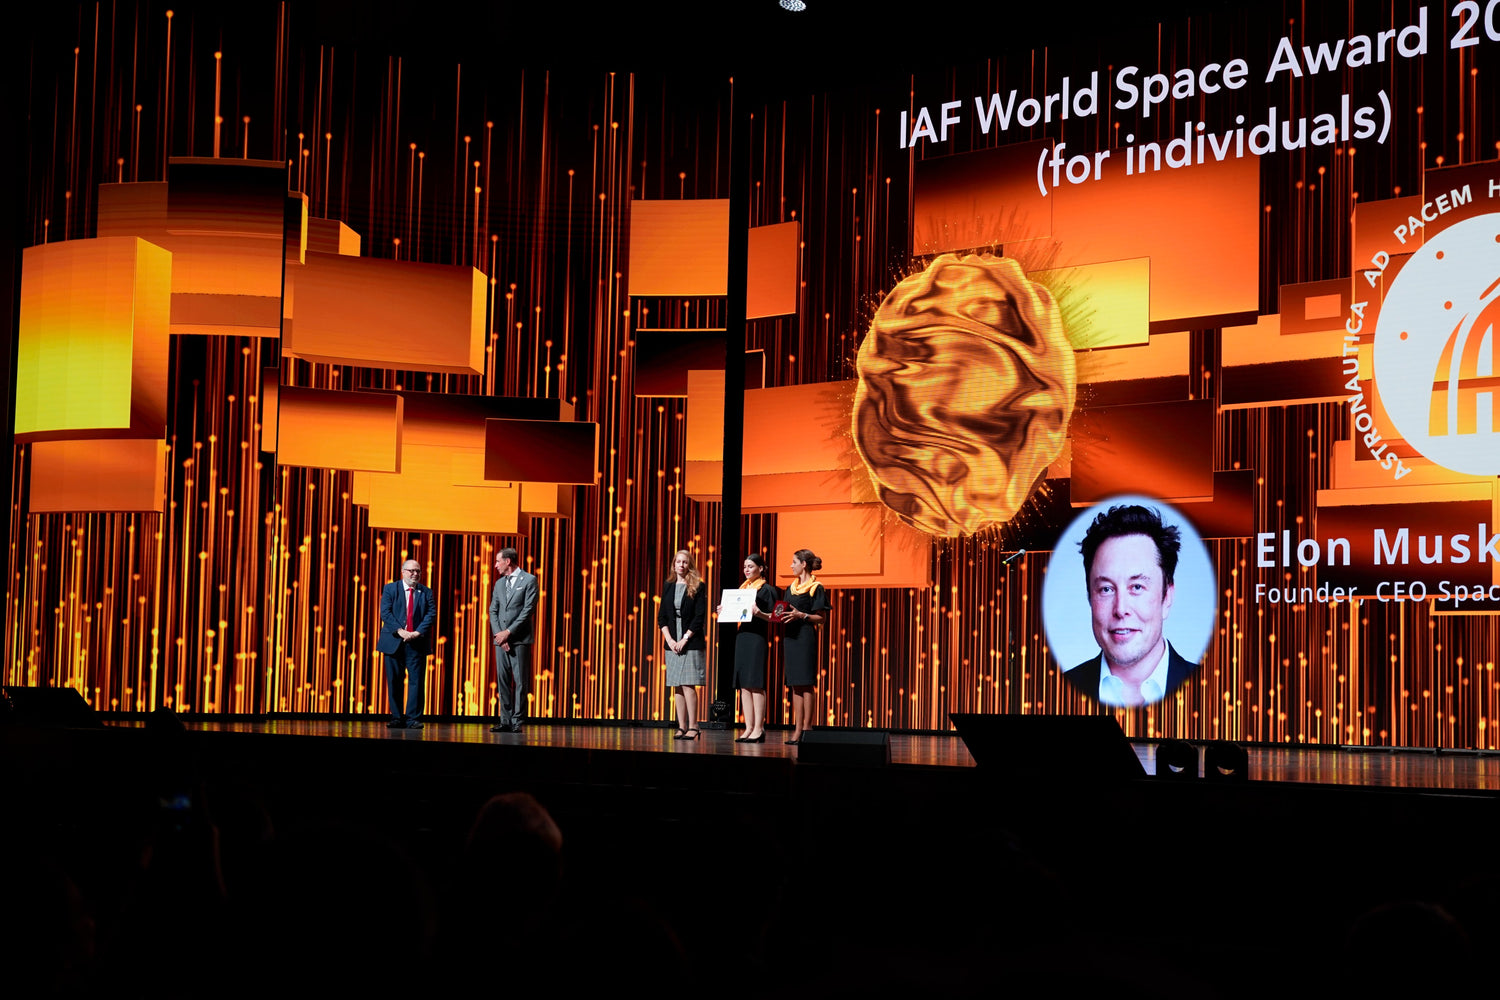 SpaceX Founder Elon Musk Wins the 2023 IAF World Space Award at 74th International Astronautical Congress